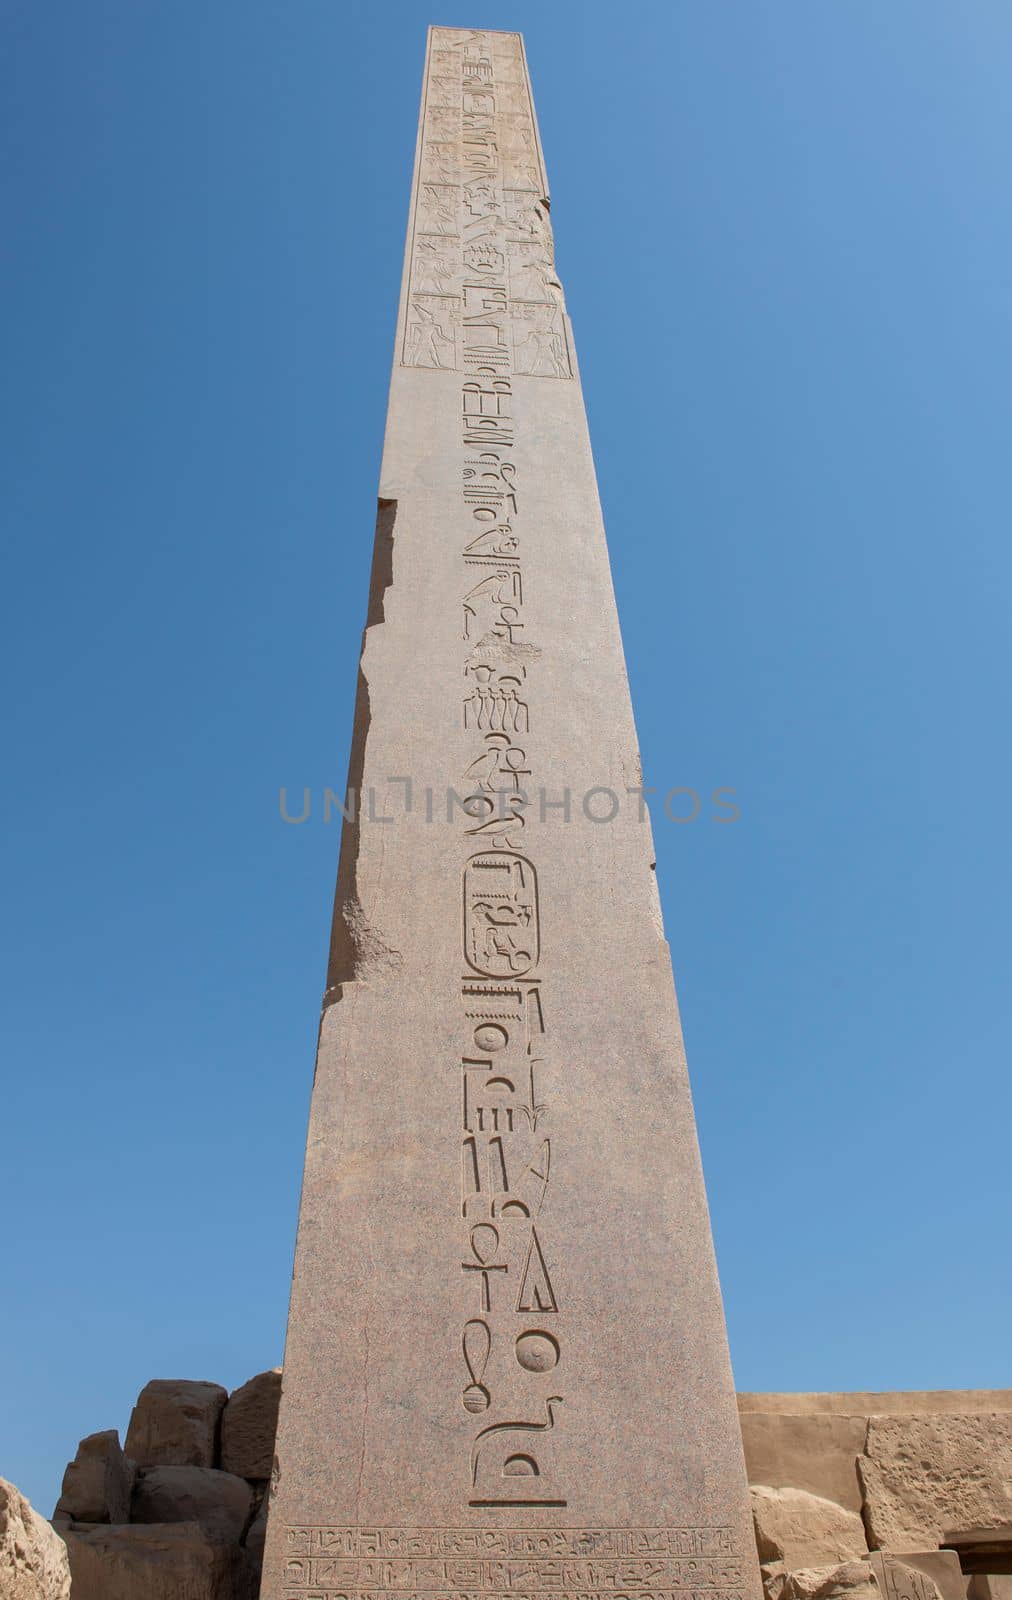 Hieroglypic carvings on tall obelisk column at the ancient egyptian Karnak Temple in Luxor Egypt against blue sky background